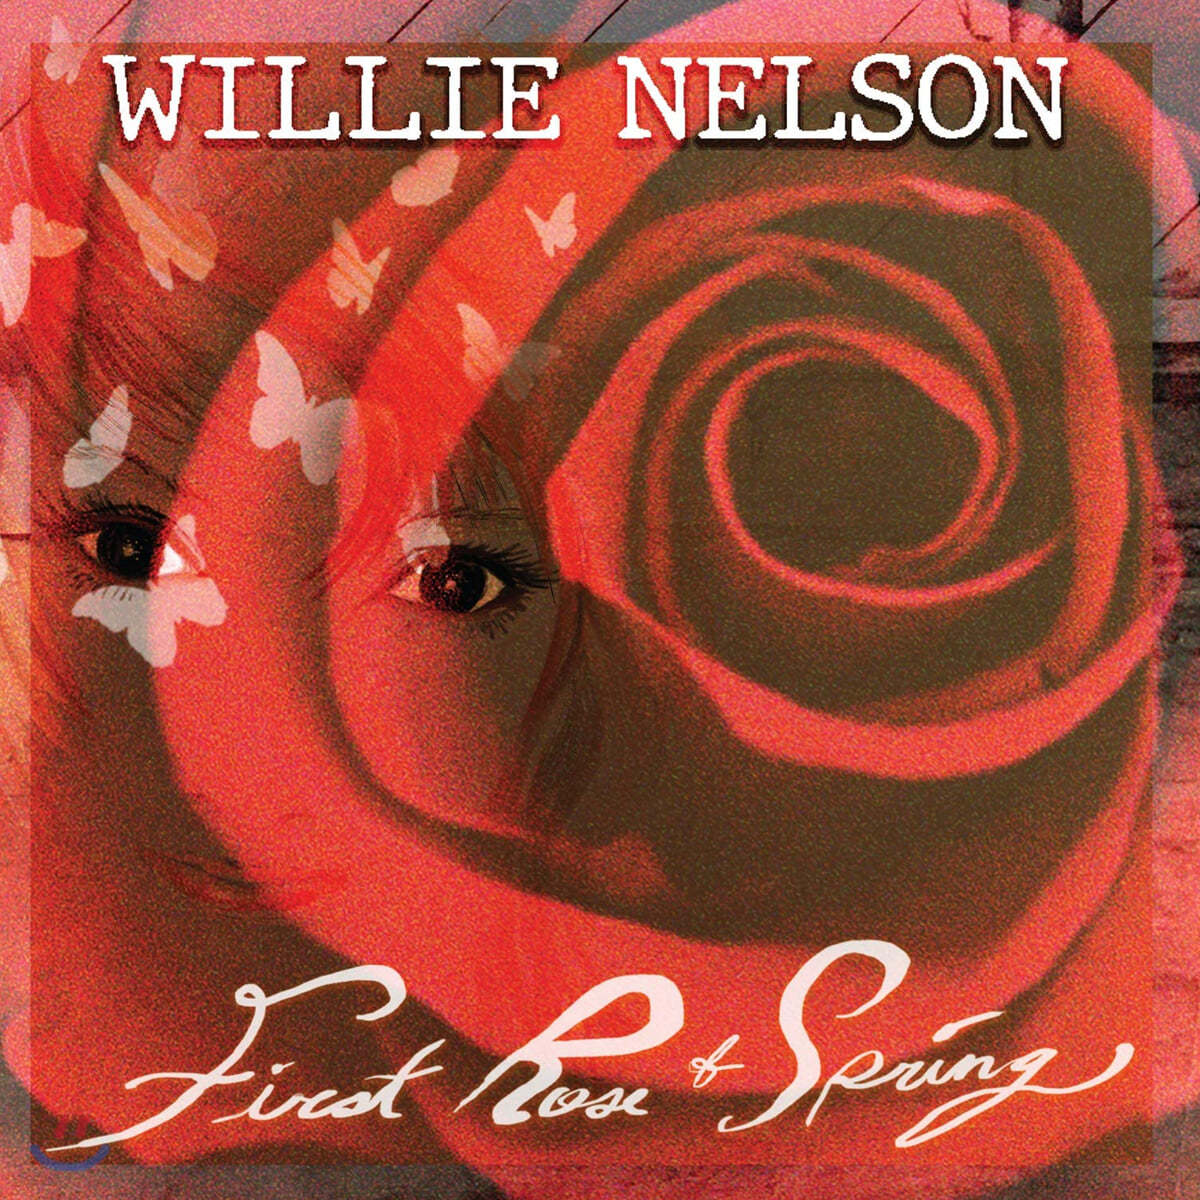 Willie Nelson (윌리 넬슨) - First Rose Of Spring [LP]